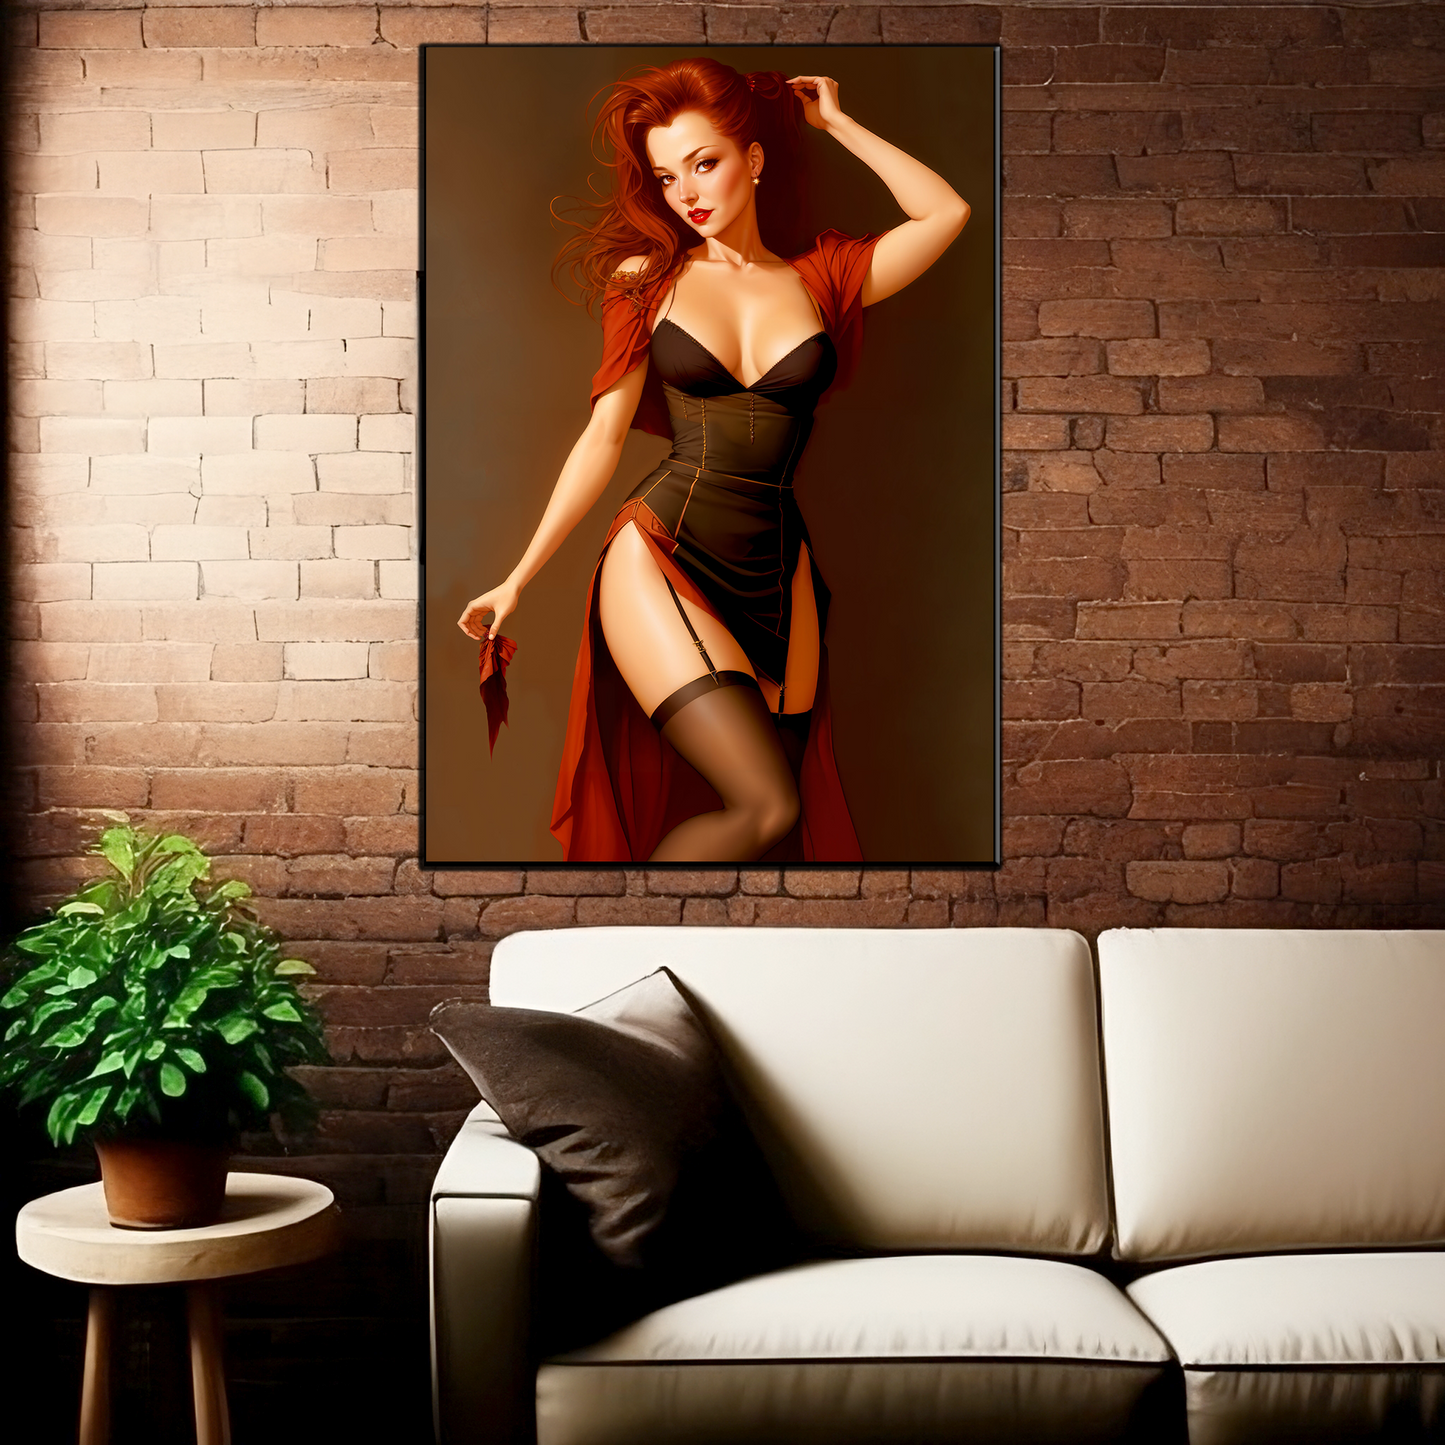 The Daily Pinup #95 - Red Wall Art